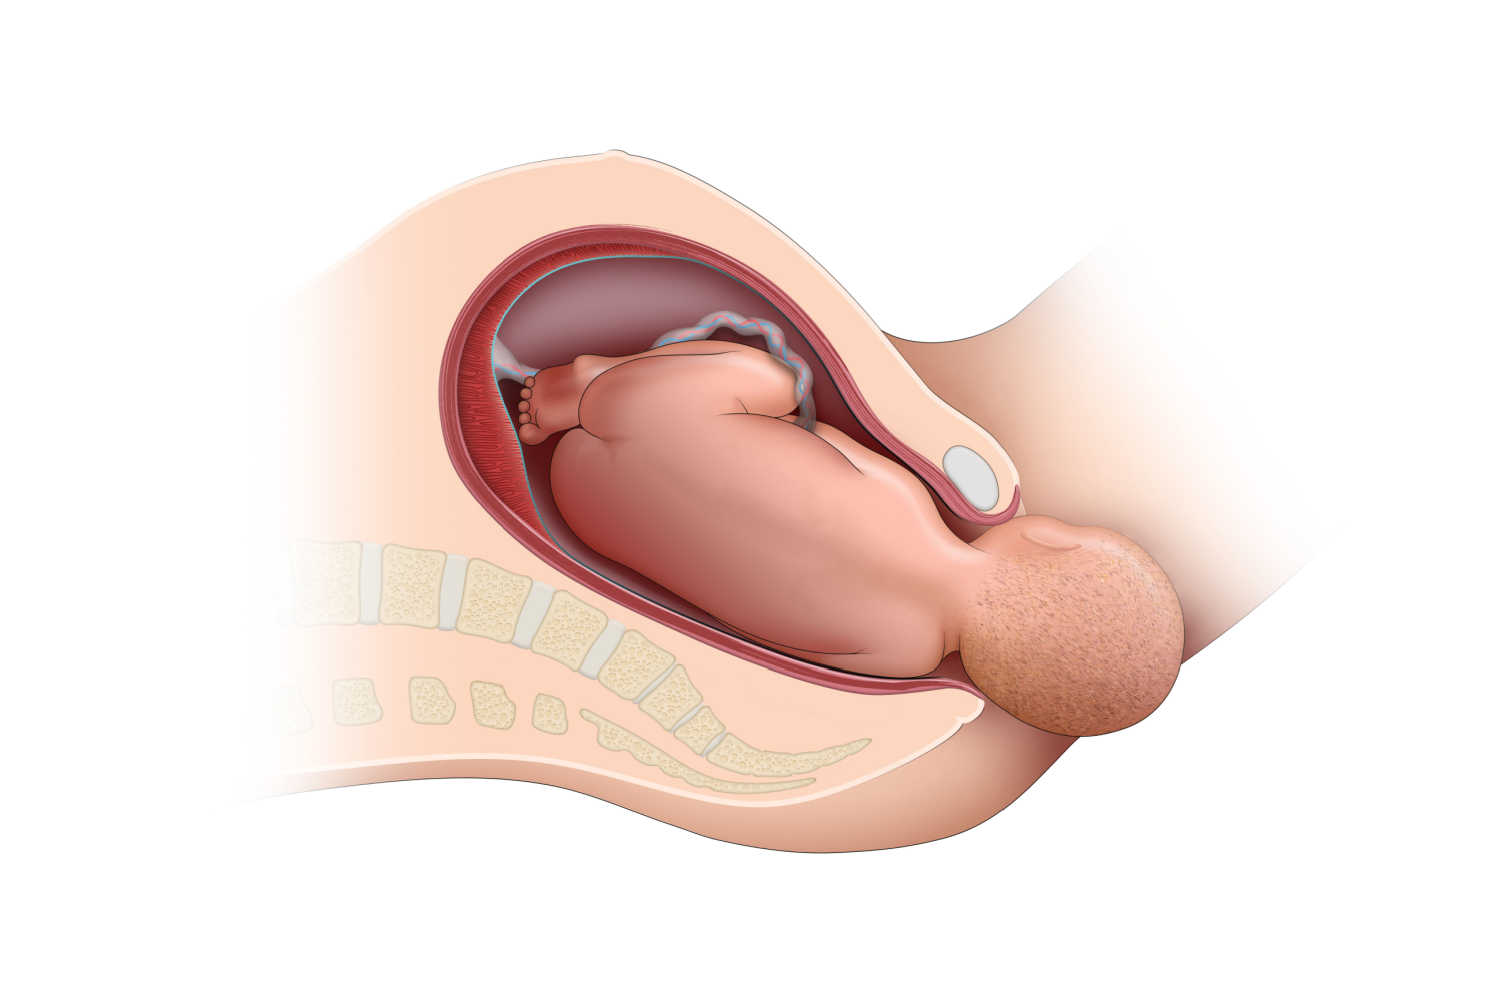 Vaginal birth - Types Of Delivery Methods